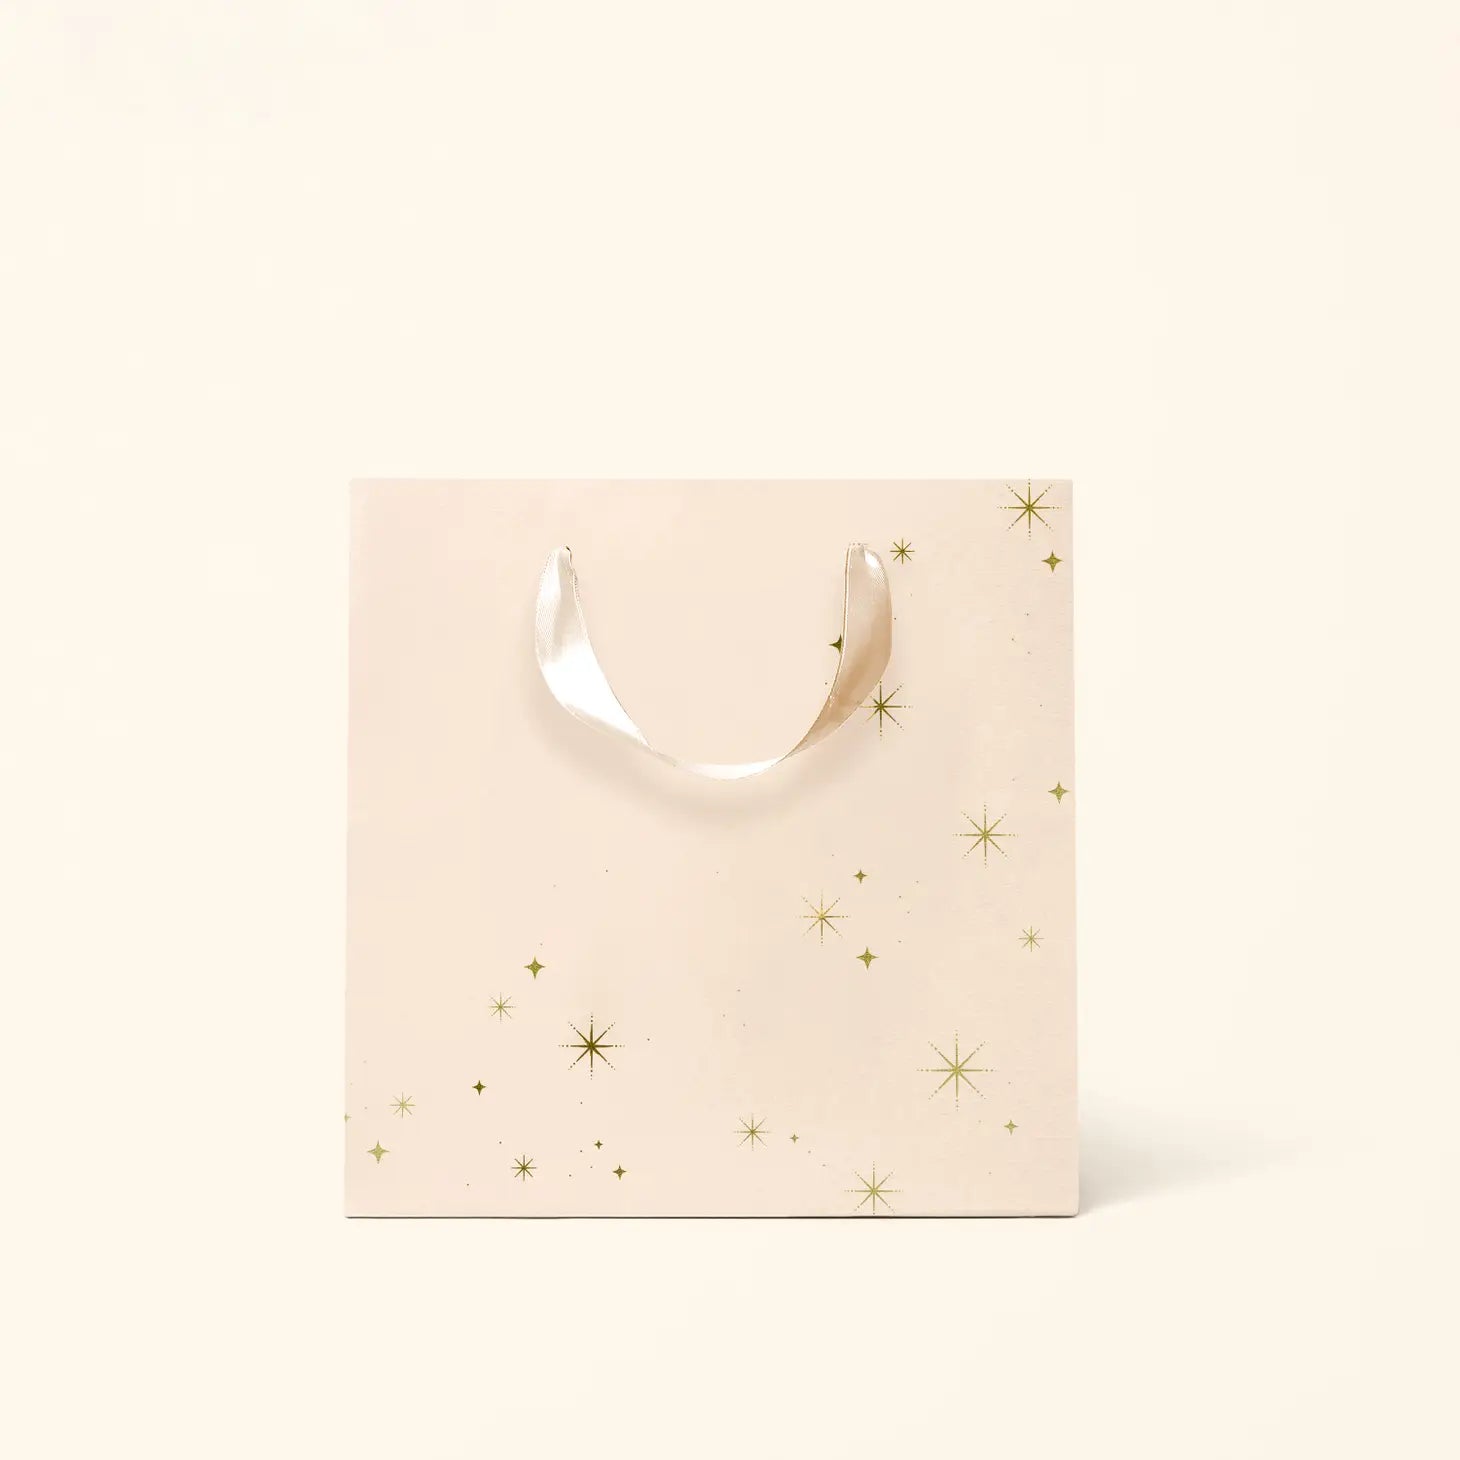 On an ivory background is a light pink gift bag with gold star details.